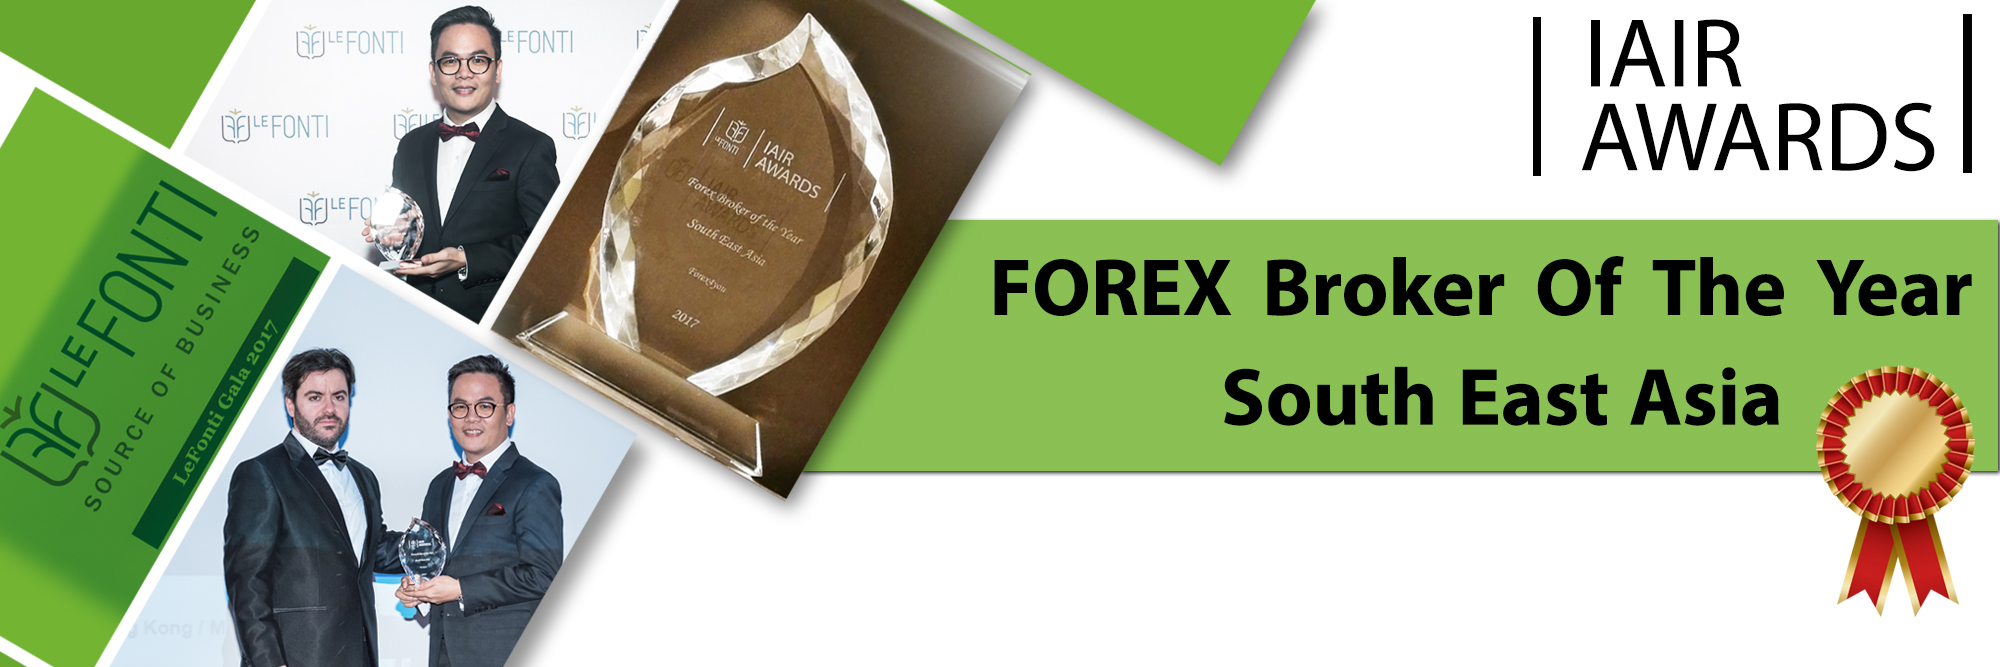 The forex awards